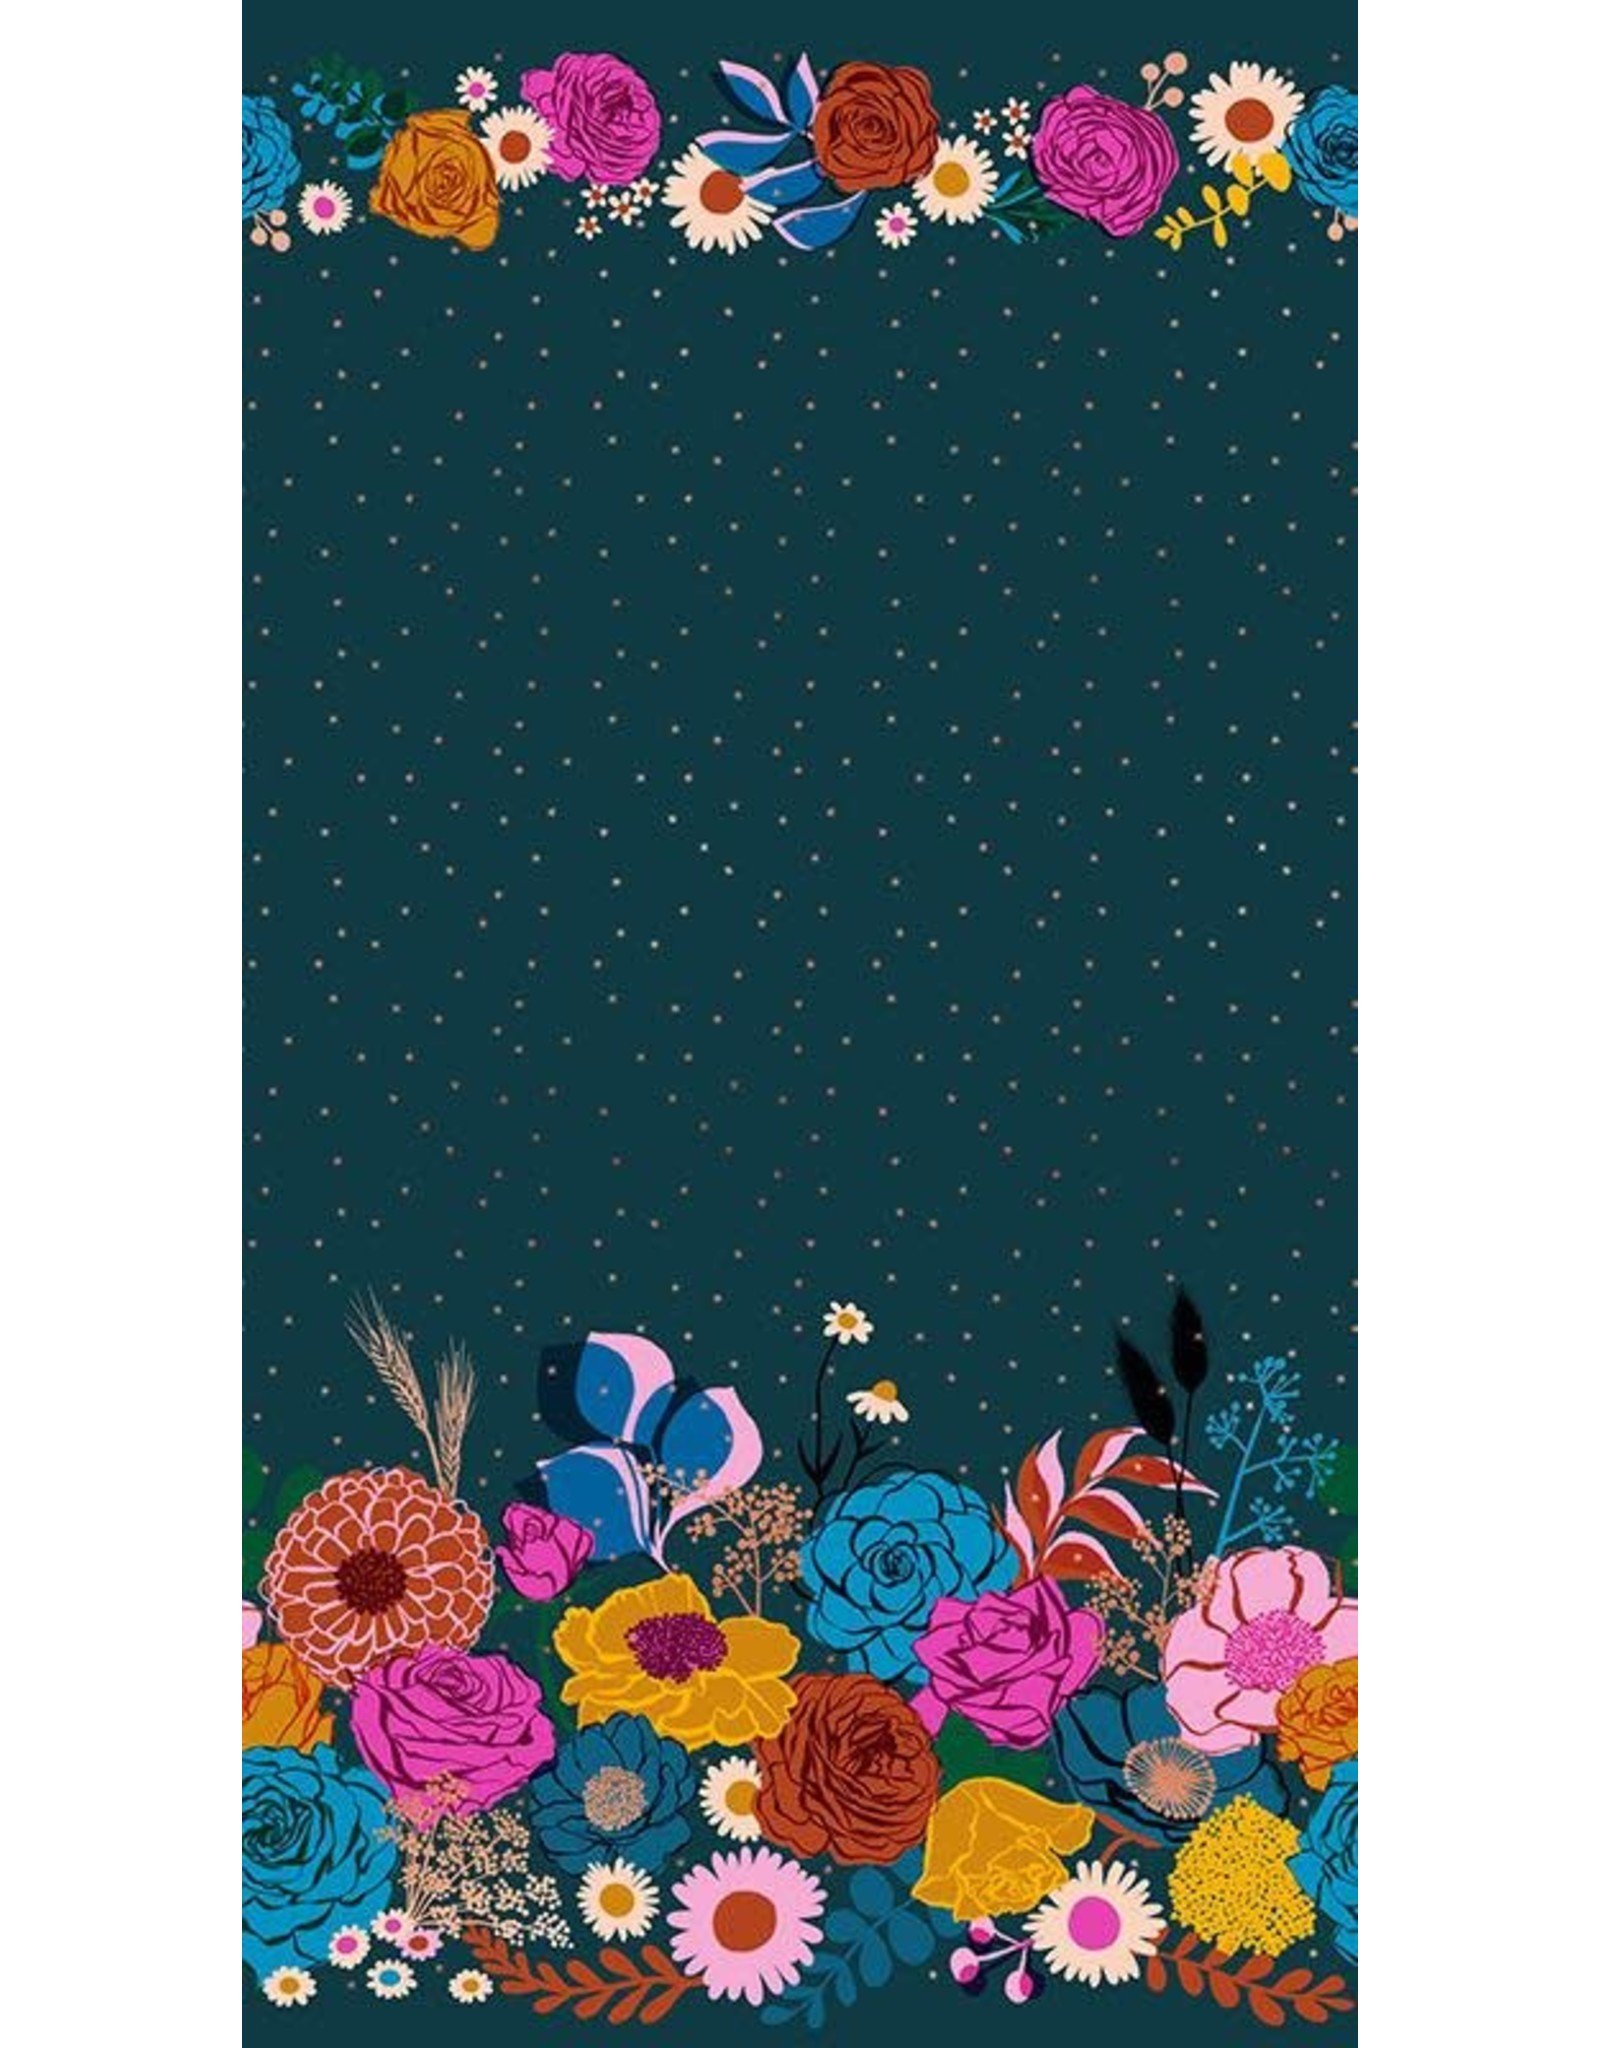 Melody Miller Ruby Star Society, Rise, Shine Double Border in Peacock with Metallic, Fabric Half-Yards RS0014 14M